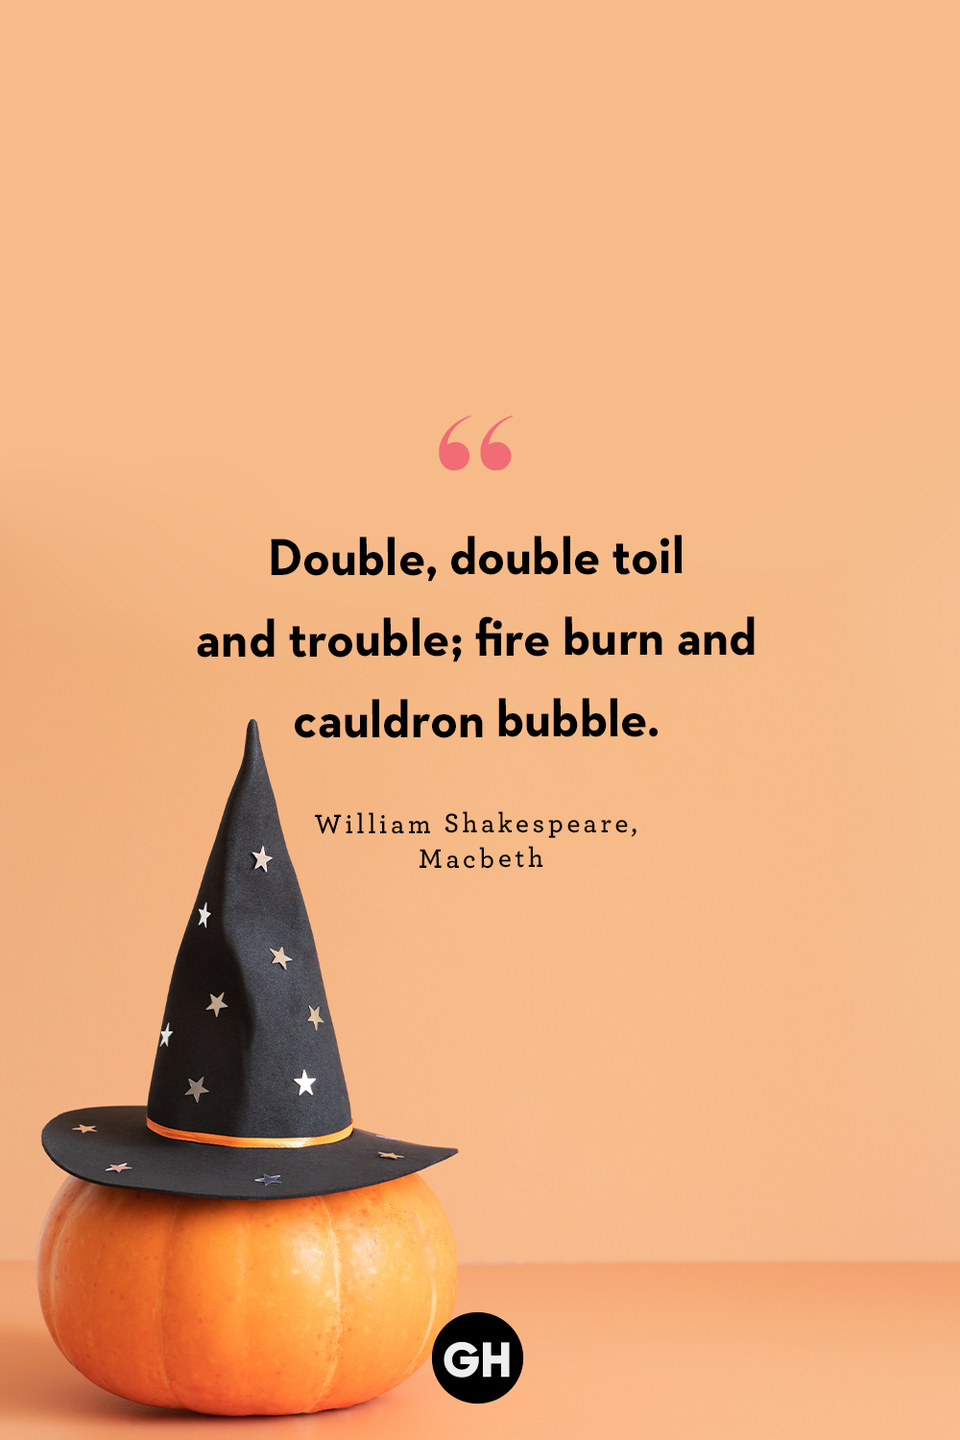 <p>“Double, double toil and trouble; fire burn and cauldron bubble.”</p>